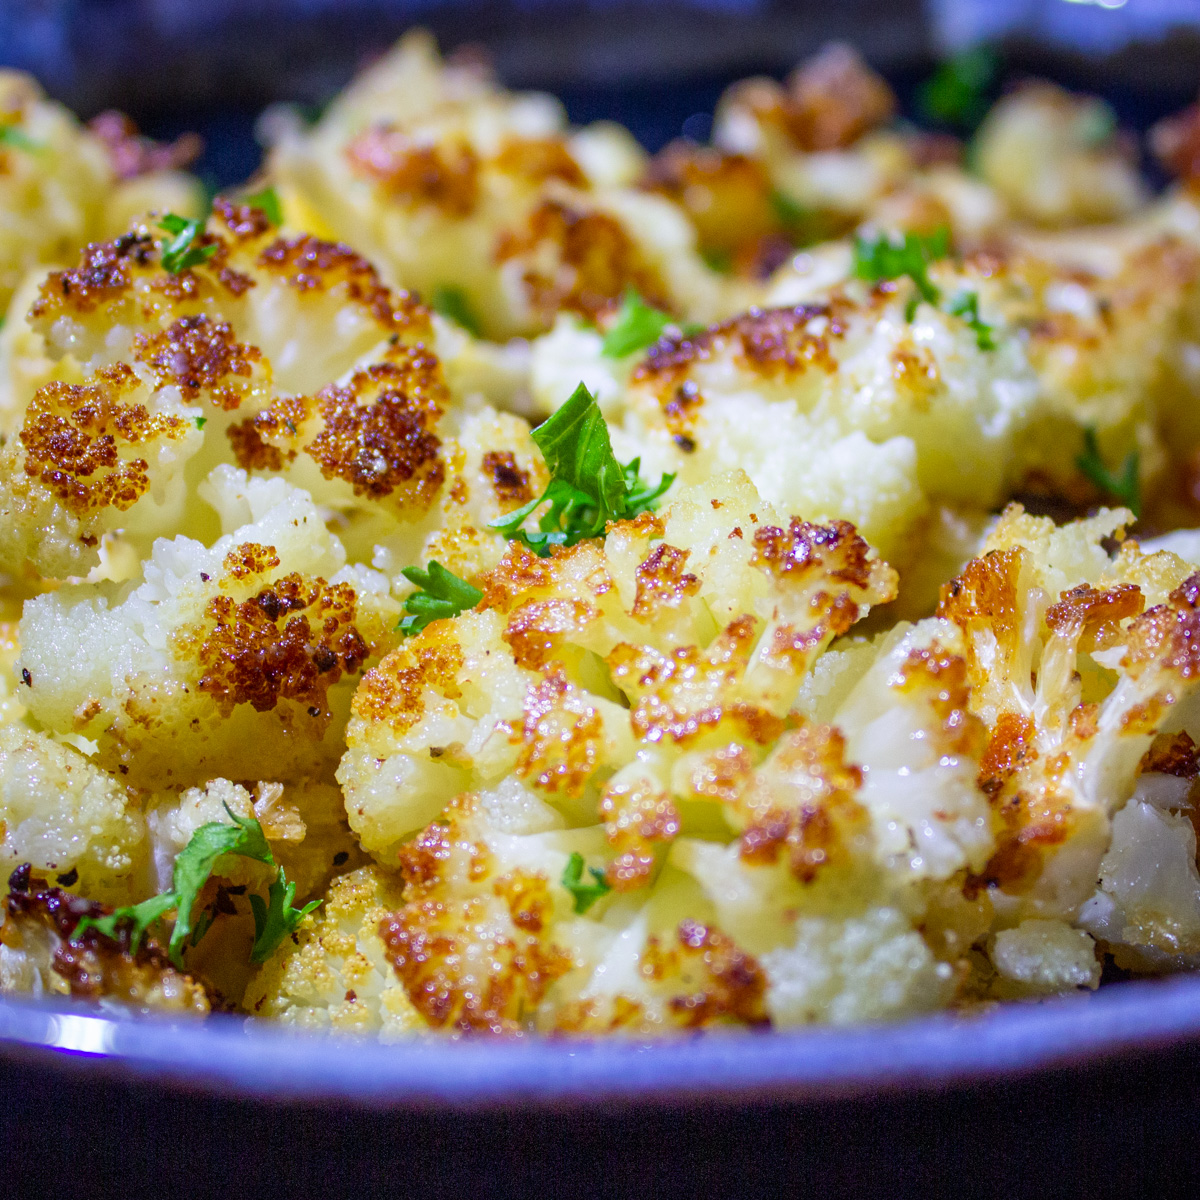 Baked Cauliflower With Cheese and Brown Crispy Edges